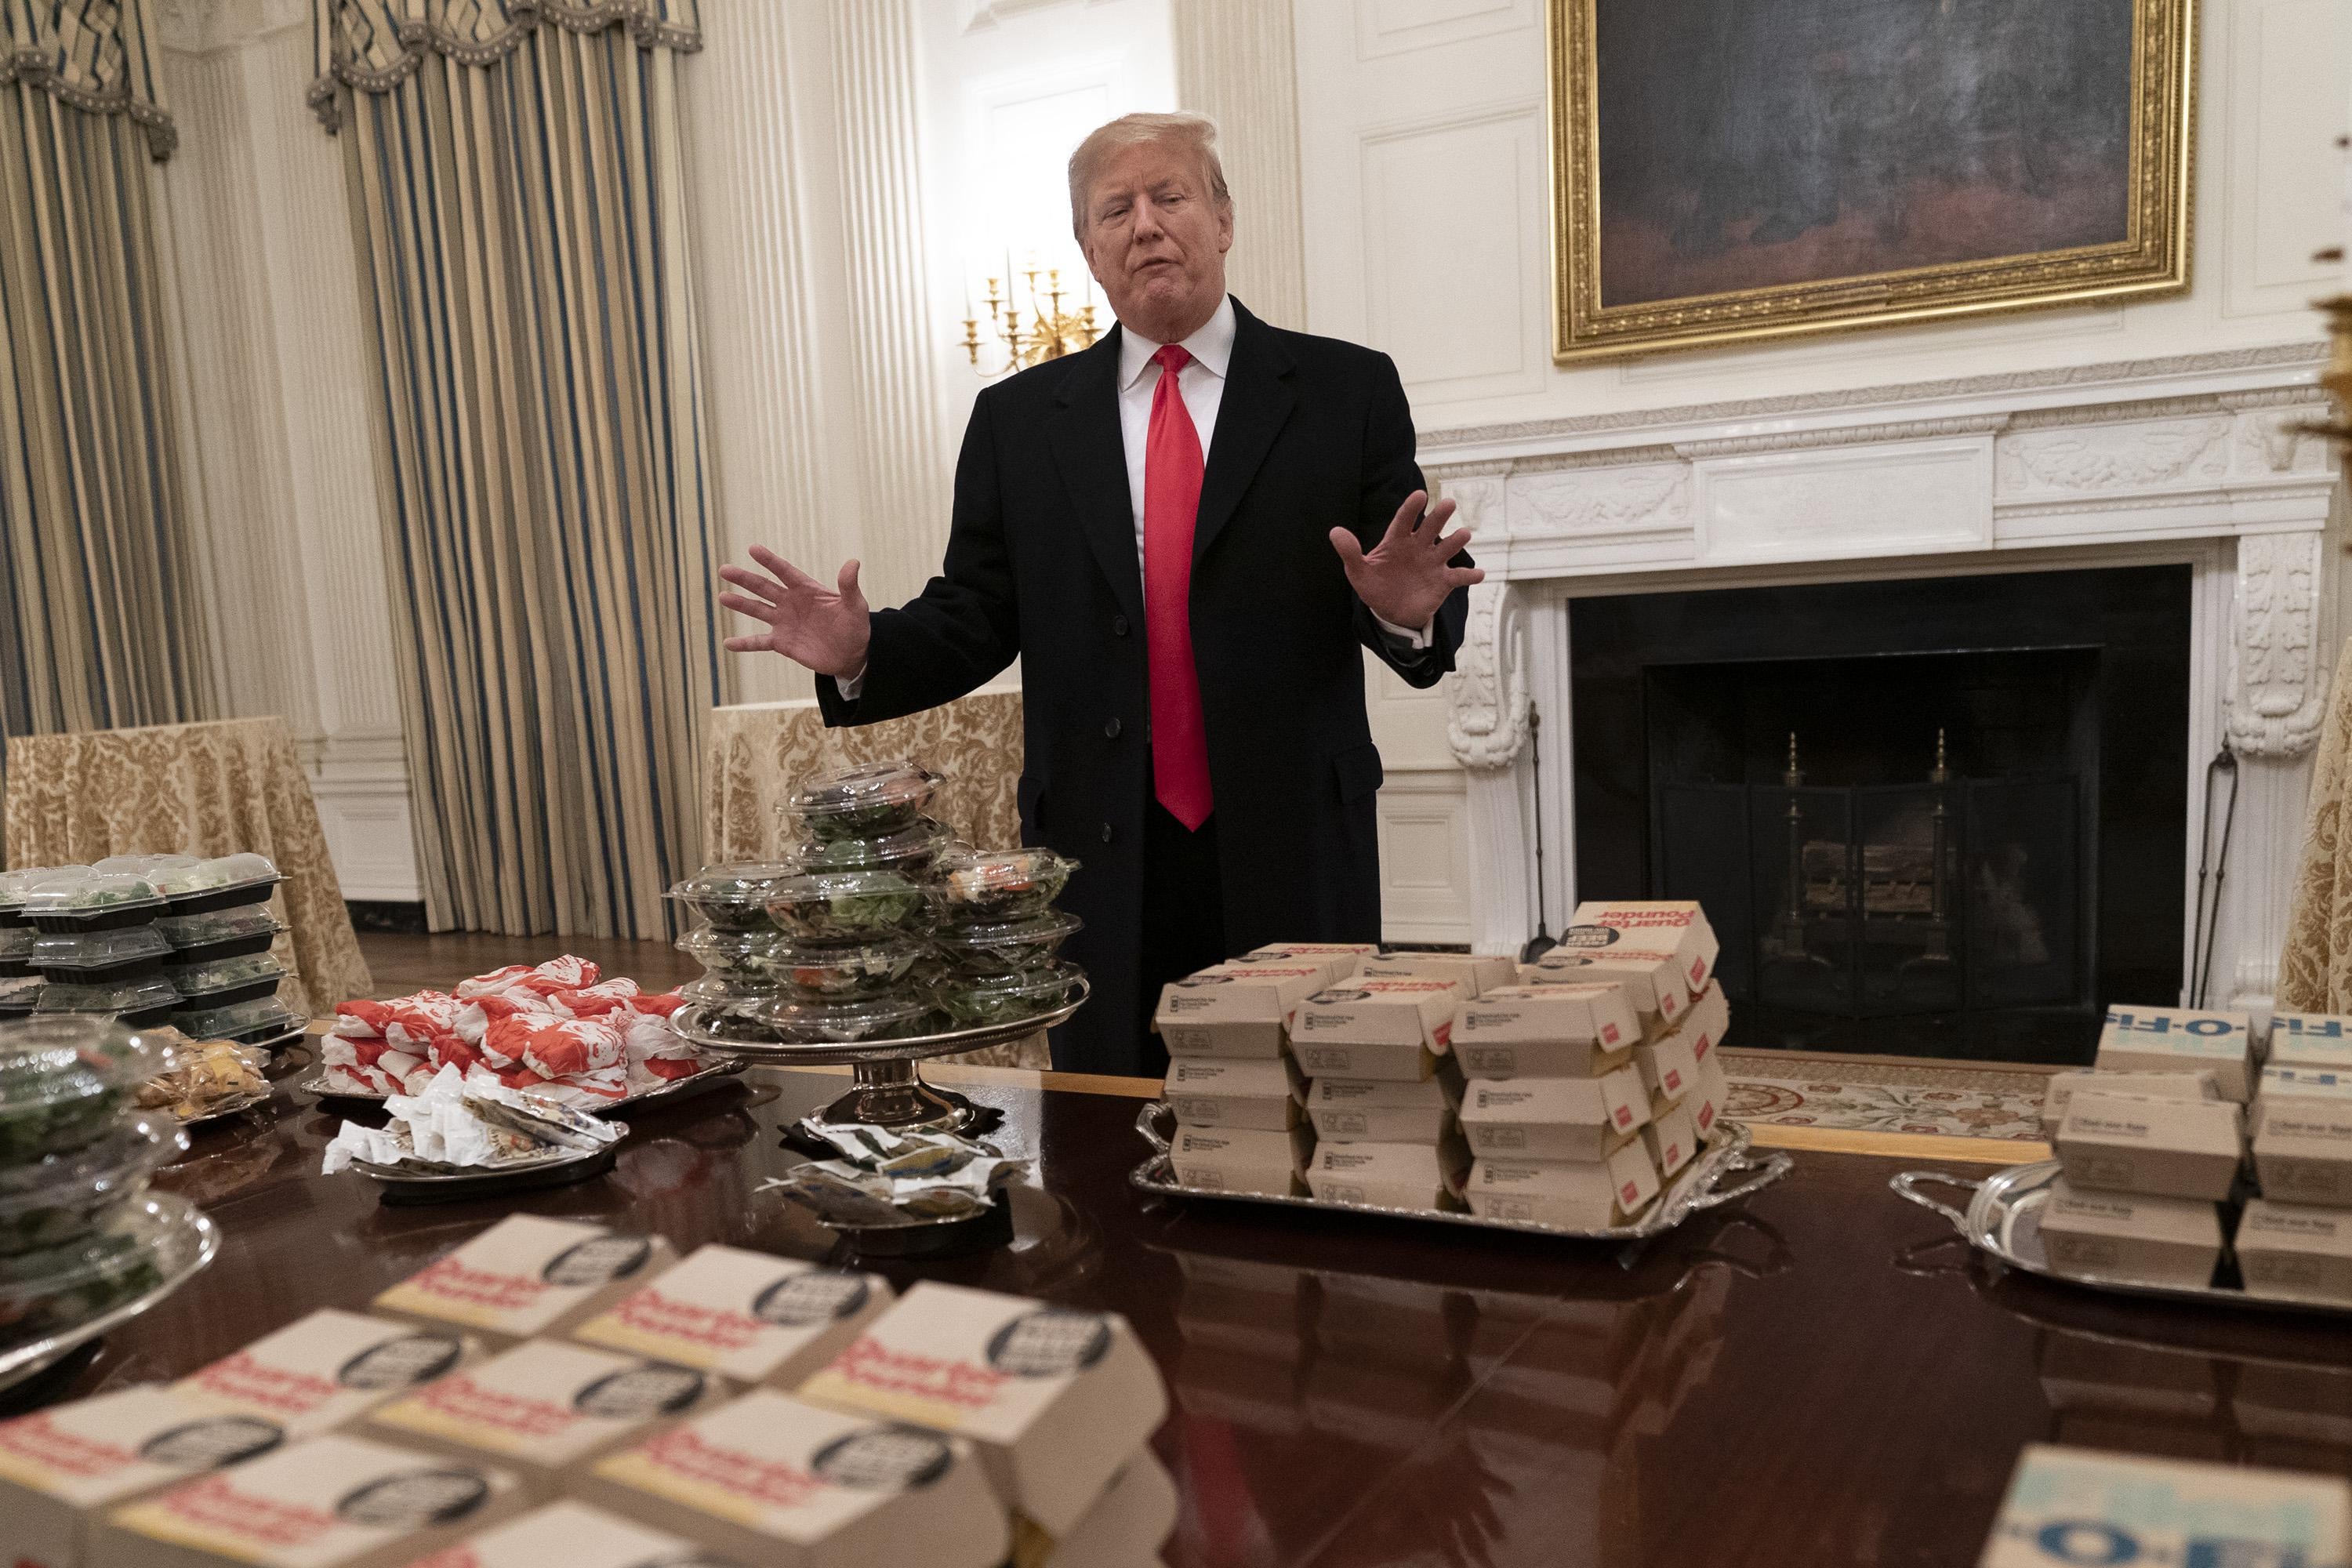 Trump and the burgers.